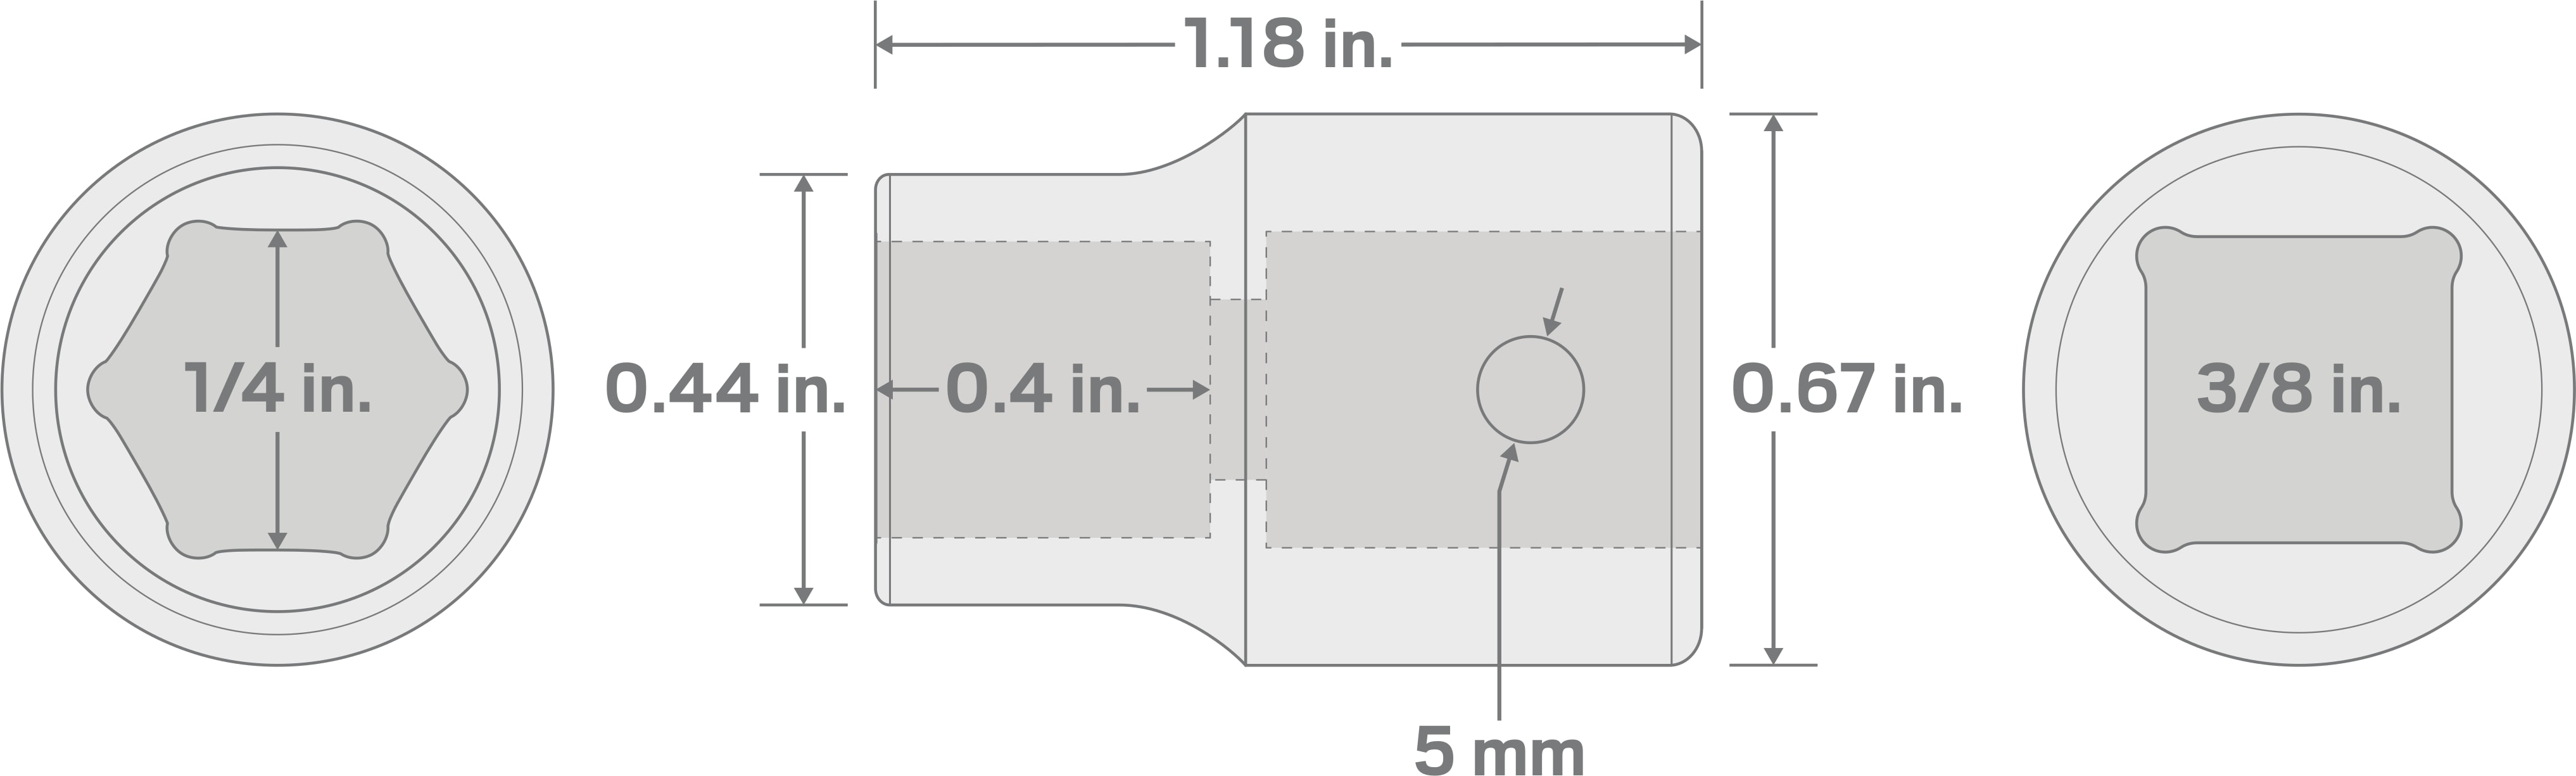 Specs for 3/8 Inch Drive x 1/4 Inch 6-Point Impact Socket